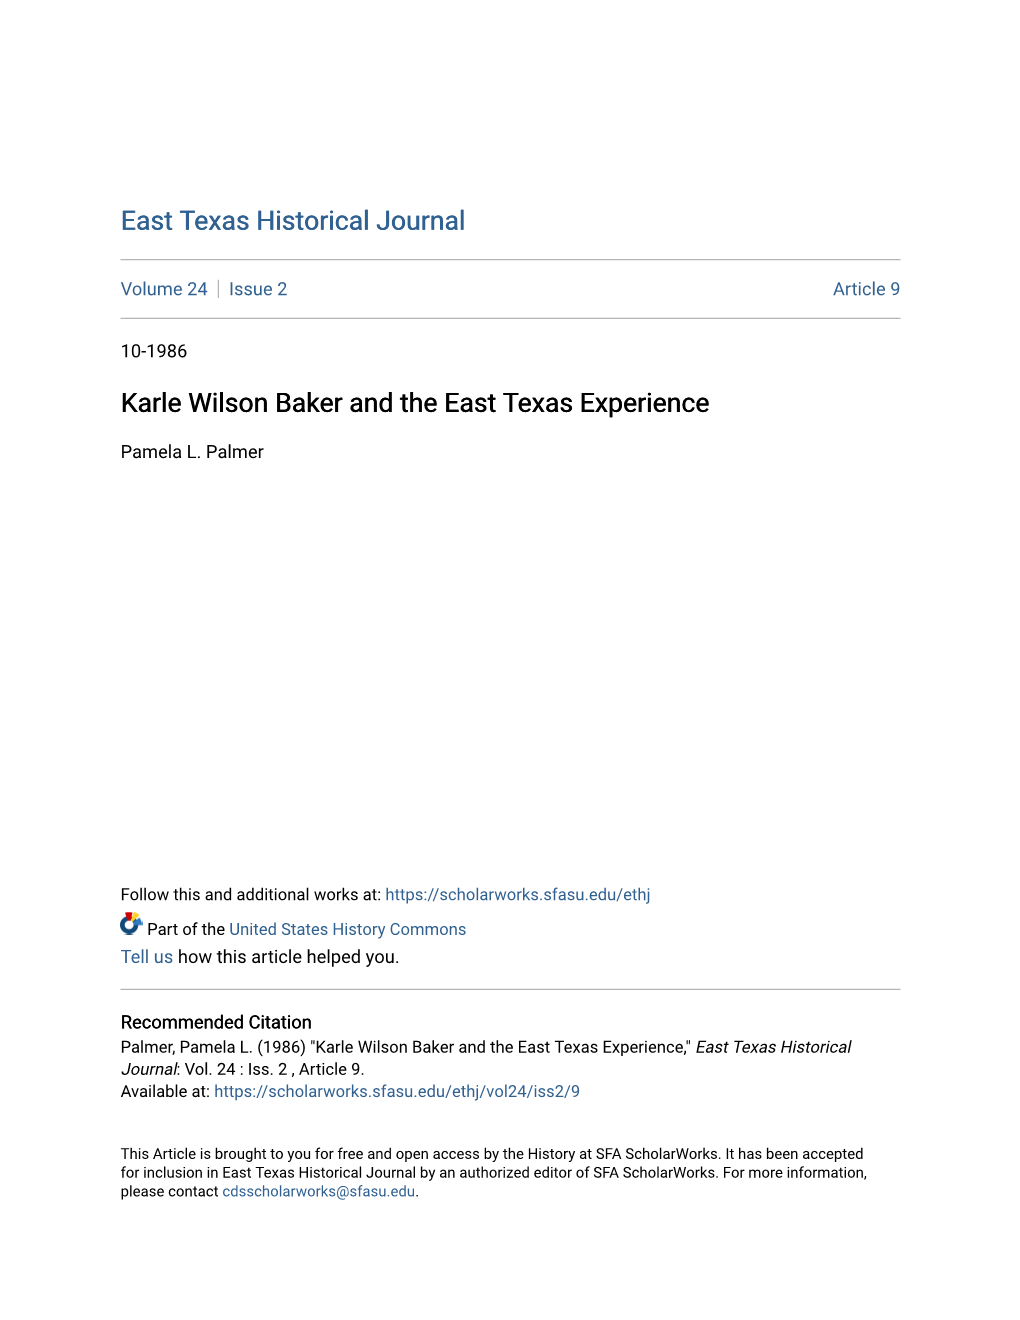 Karle Wilson Baker and the East Texas Experience